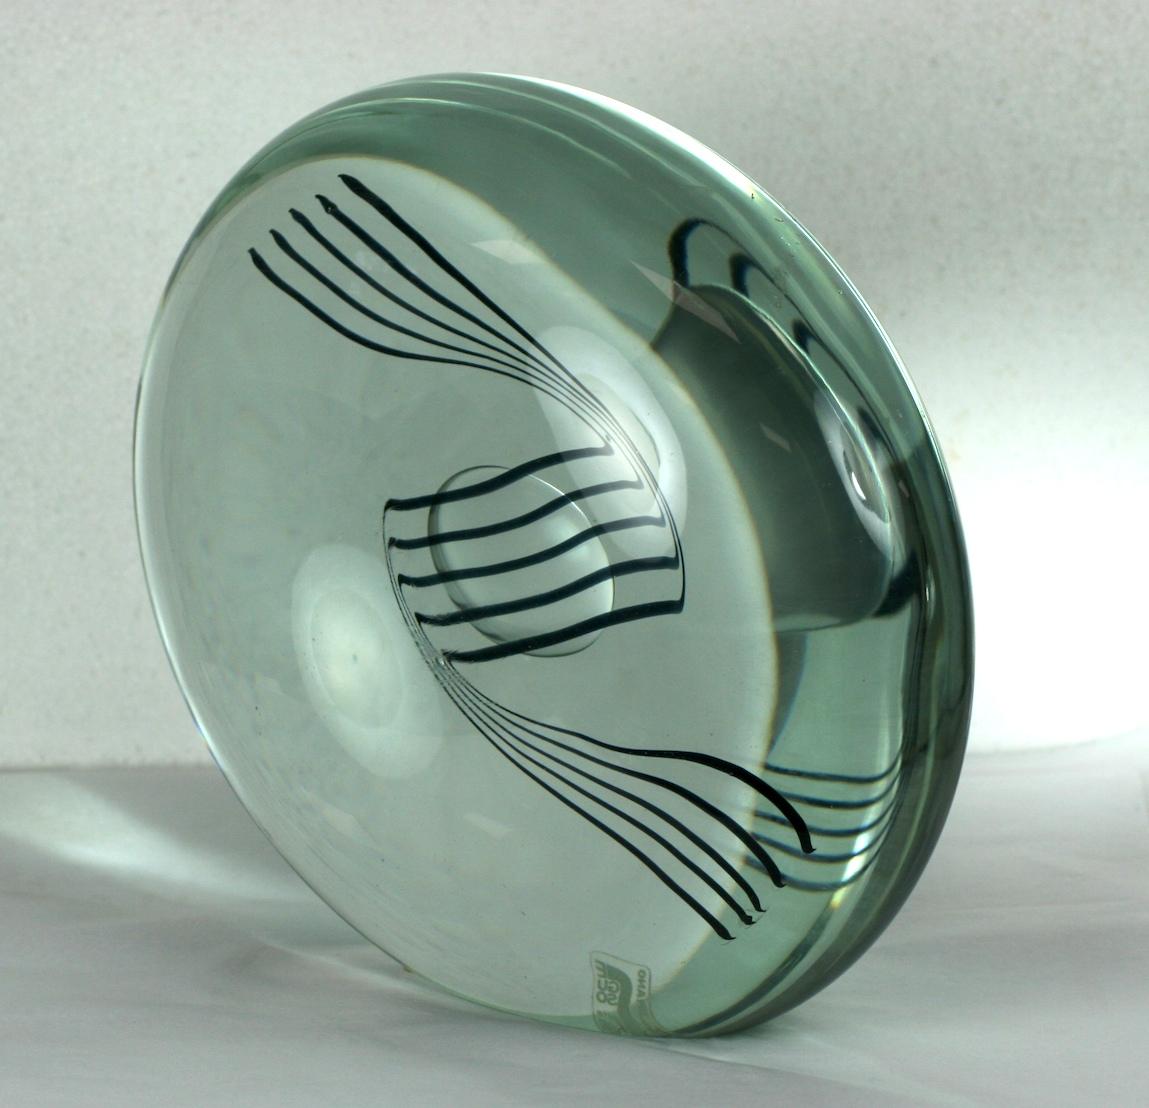 Studio Seguso Arte Vetro sculpture of pale sea green toned glass with internally striped black ribbon pattern with a frosted central bubble. 1970's old stock from the Seguso showroom.
Marked Studio Seguso Arte with original labels intact.